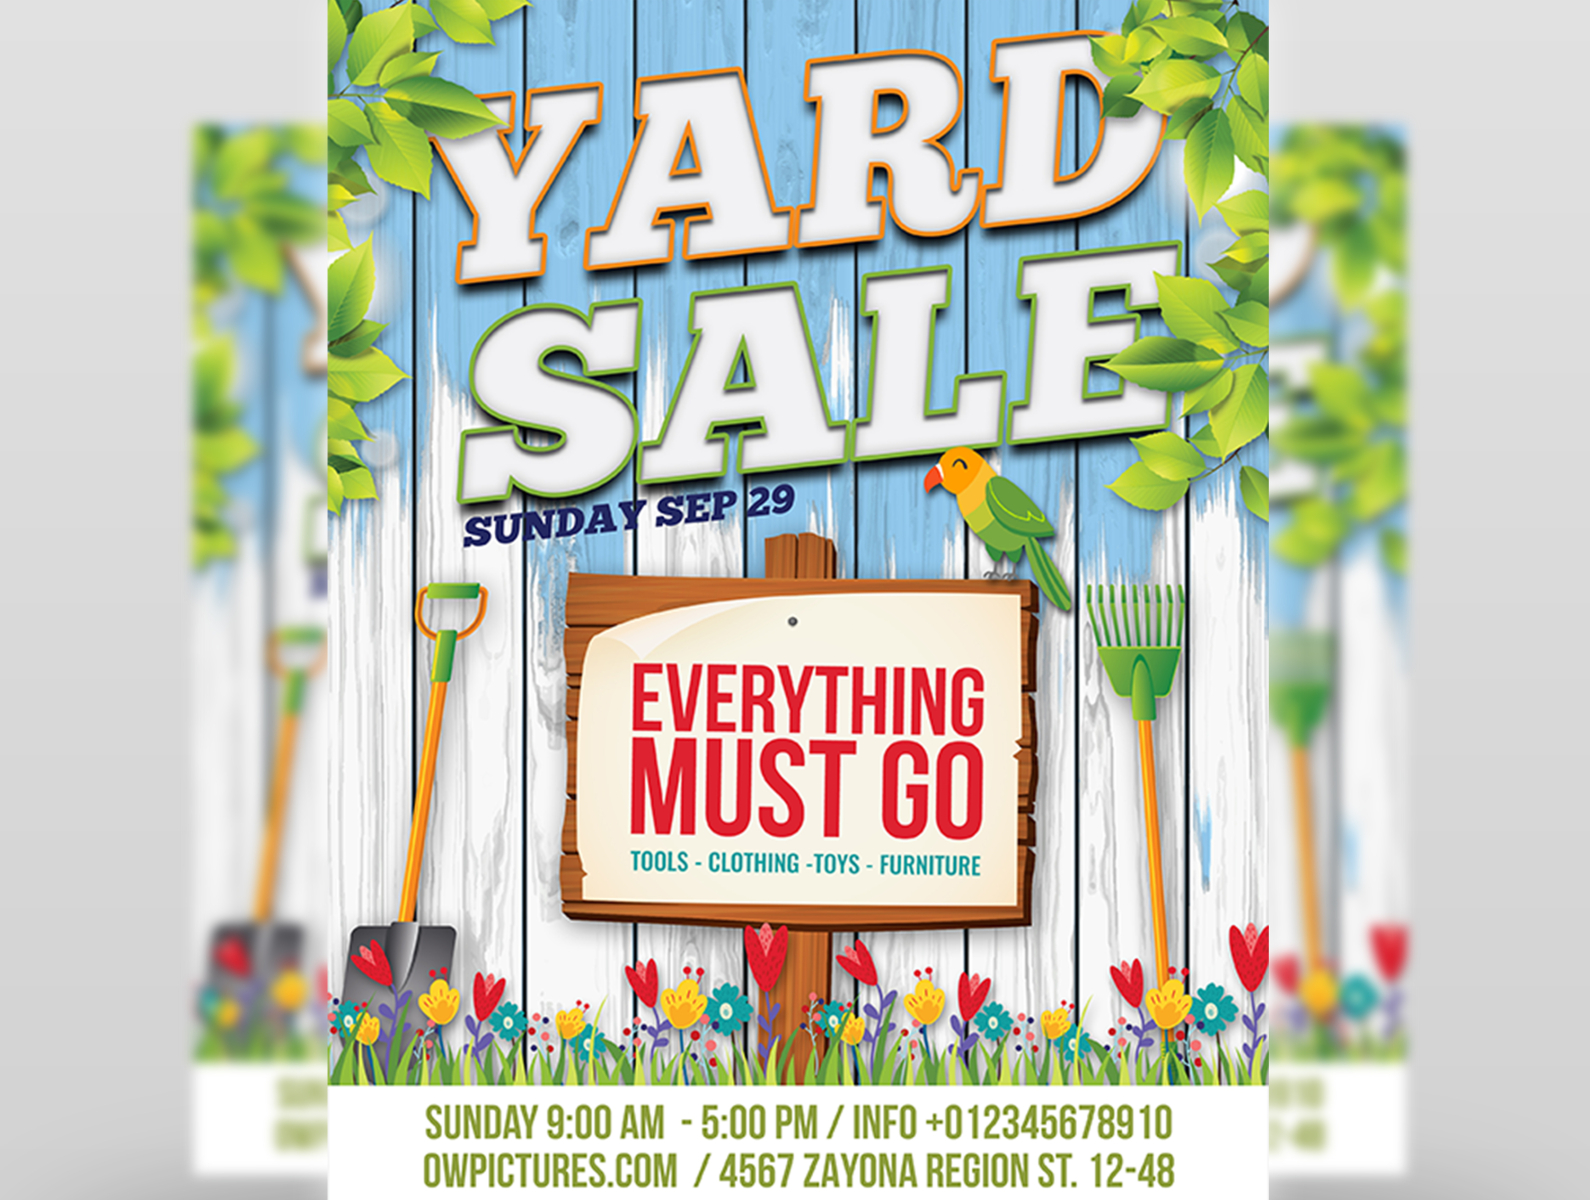 Yard Sale Garage Sales Flyer Template by OWPictures on Dribbble